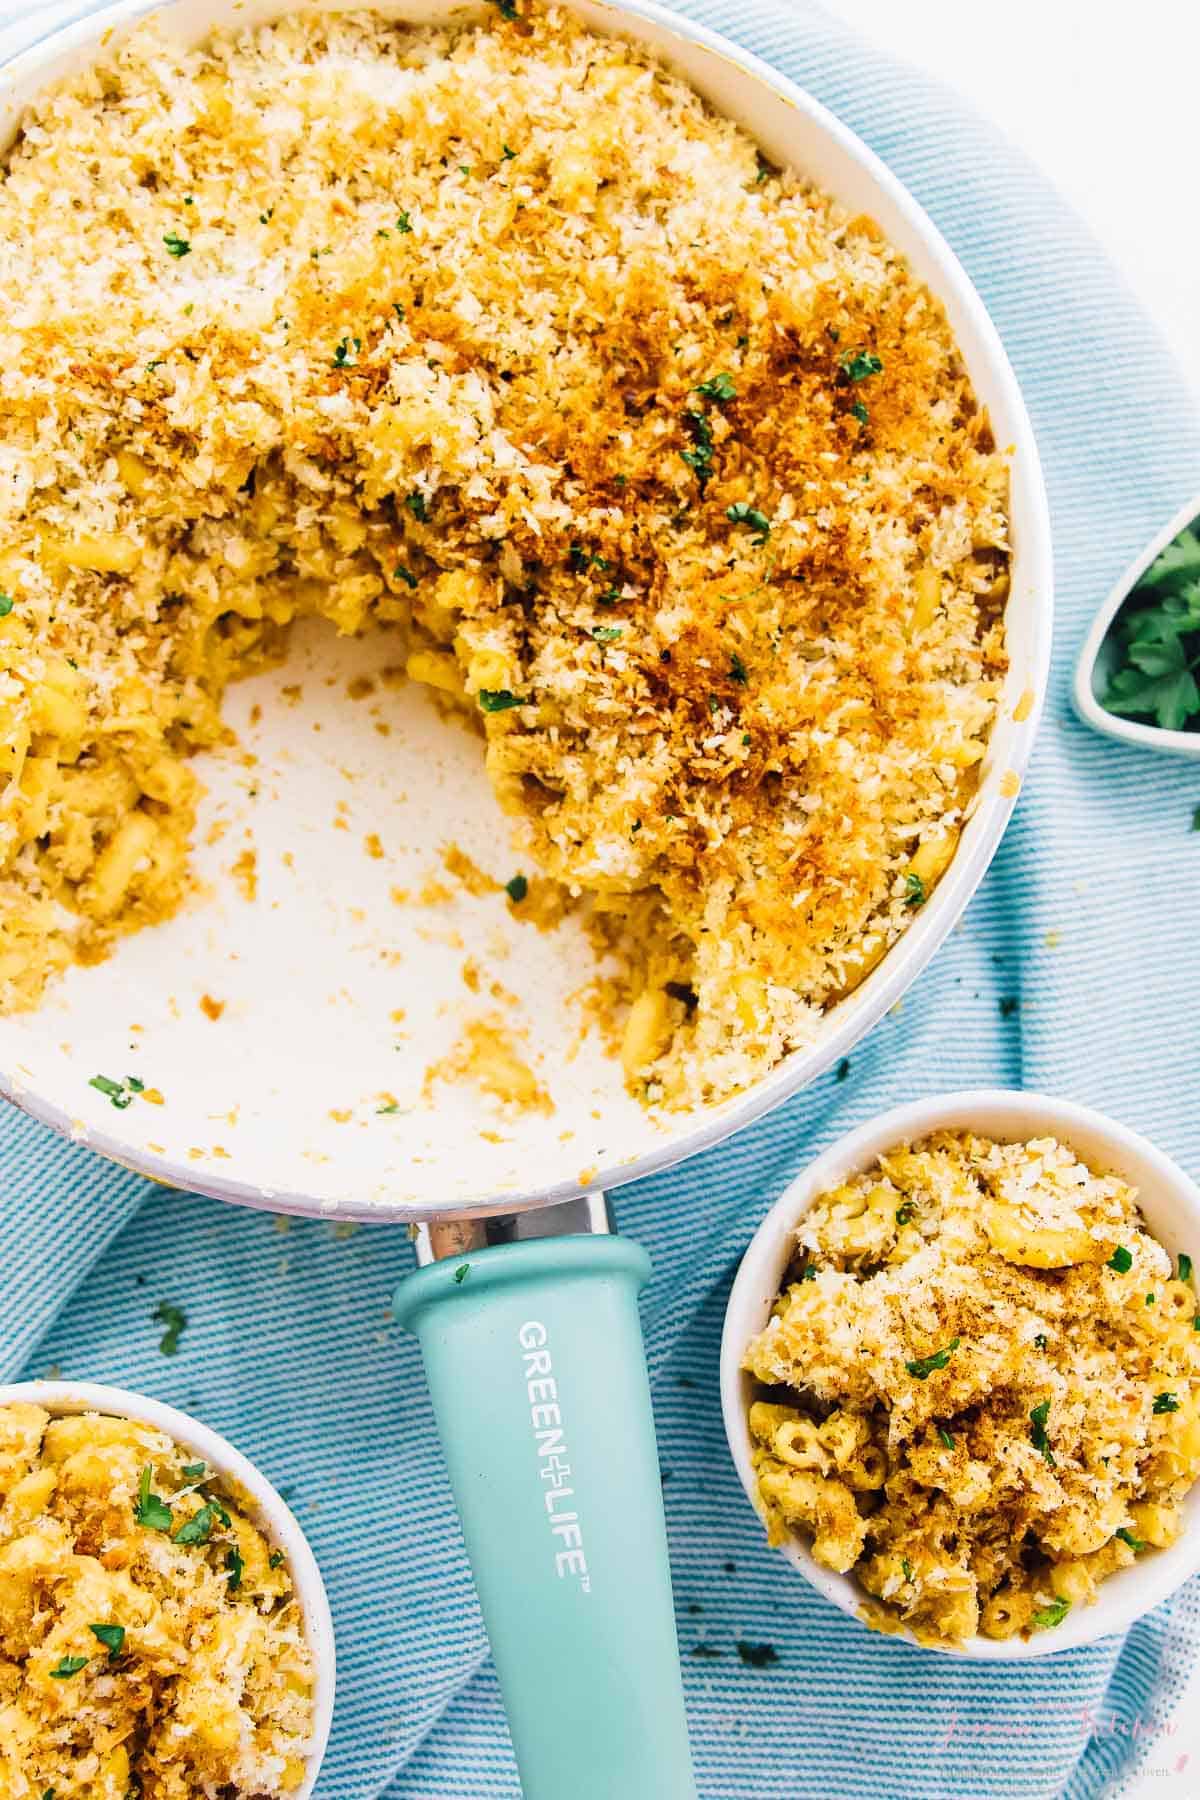 Top down view of creamy baked vegan mac & cheese in a skillet with a blue handle.